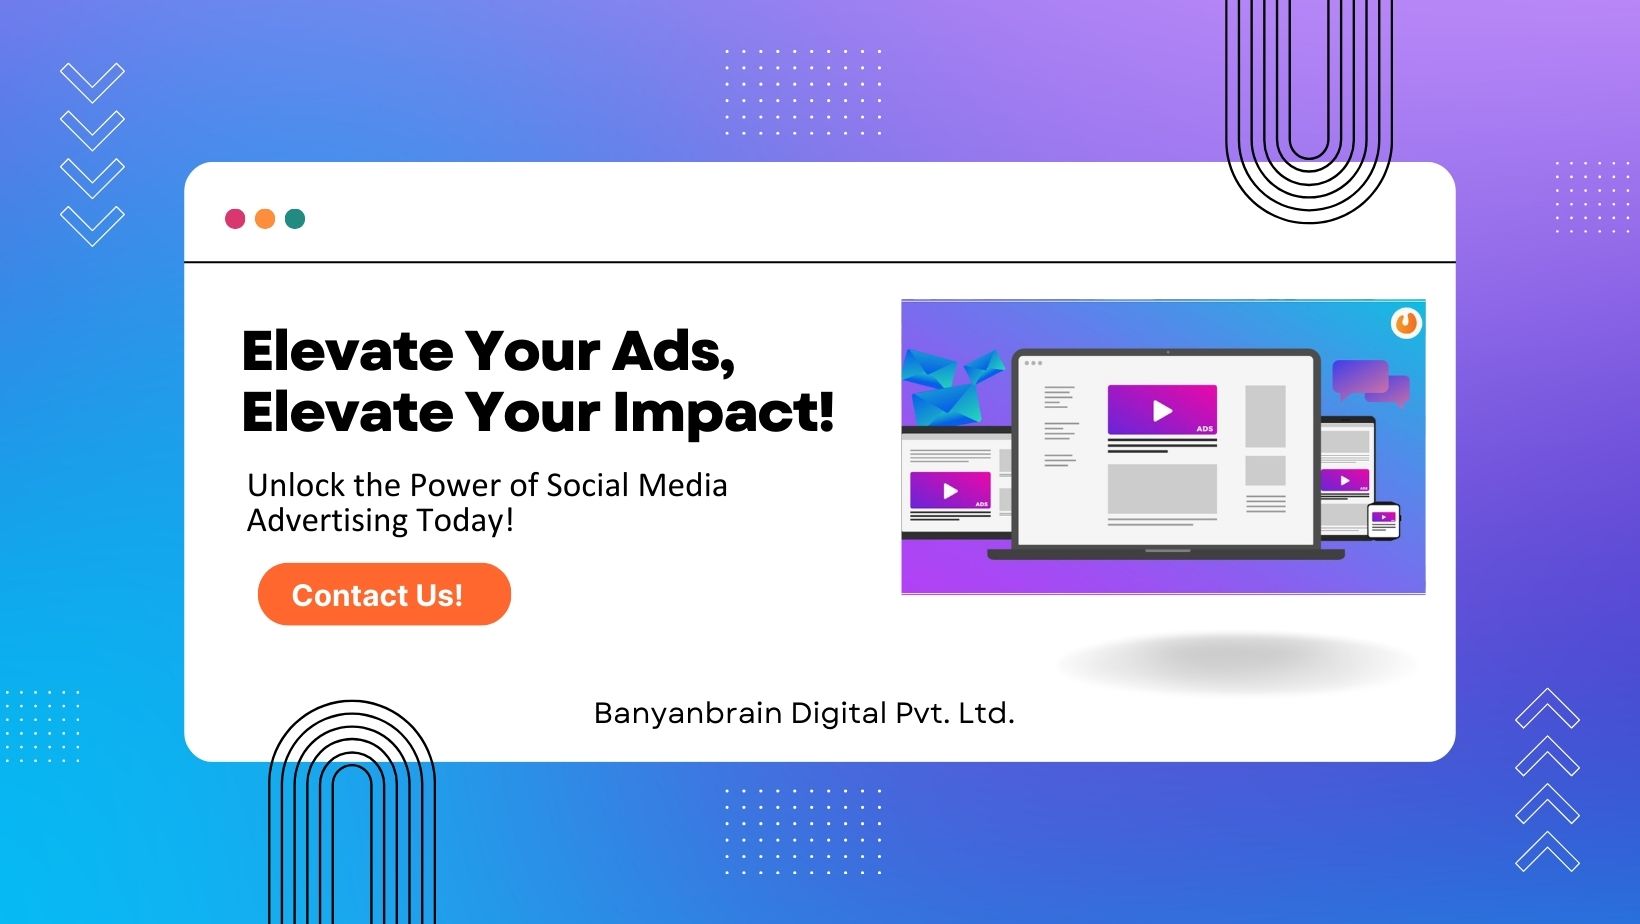 Facebook ad campaign services by Banyanbrain